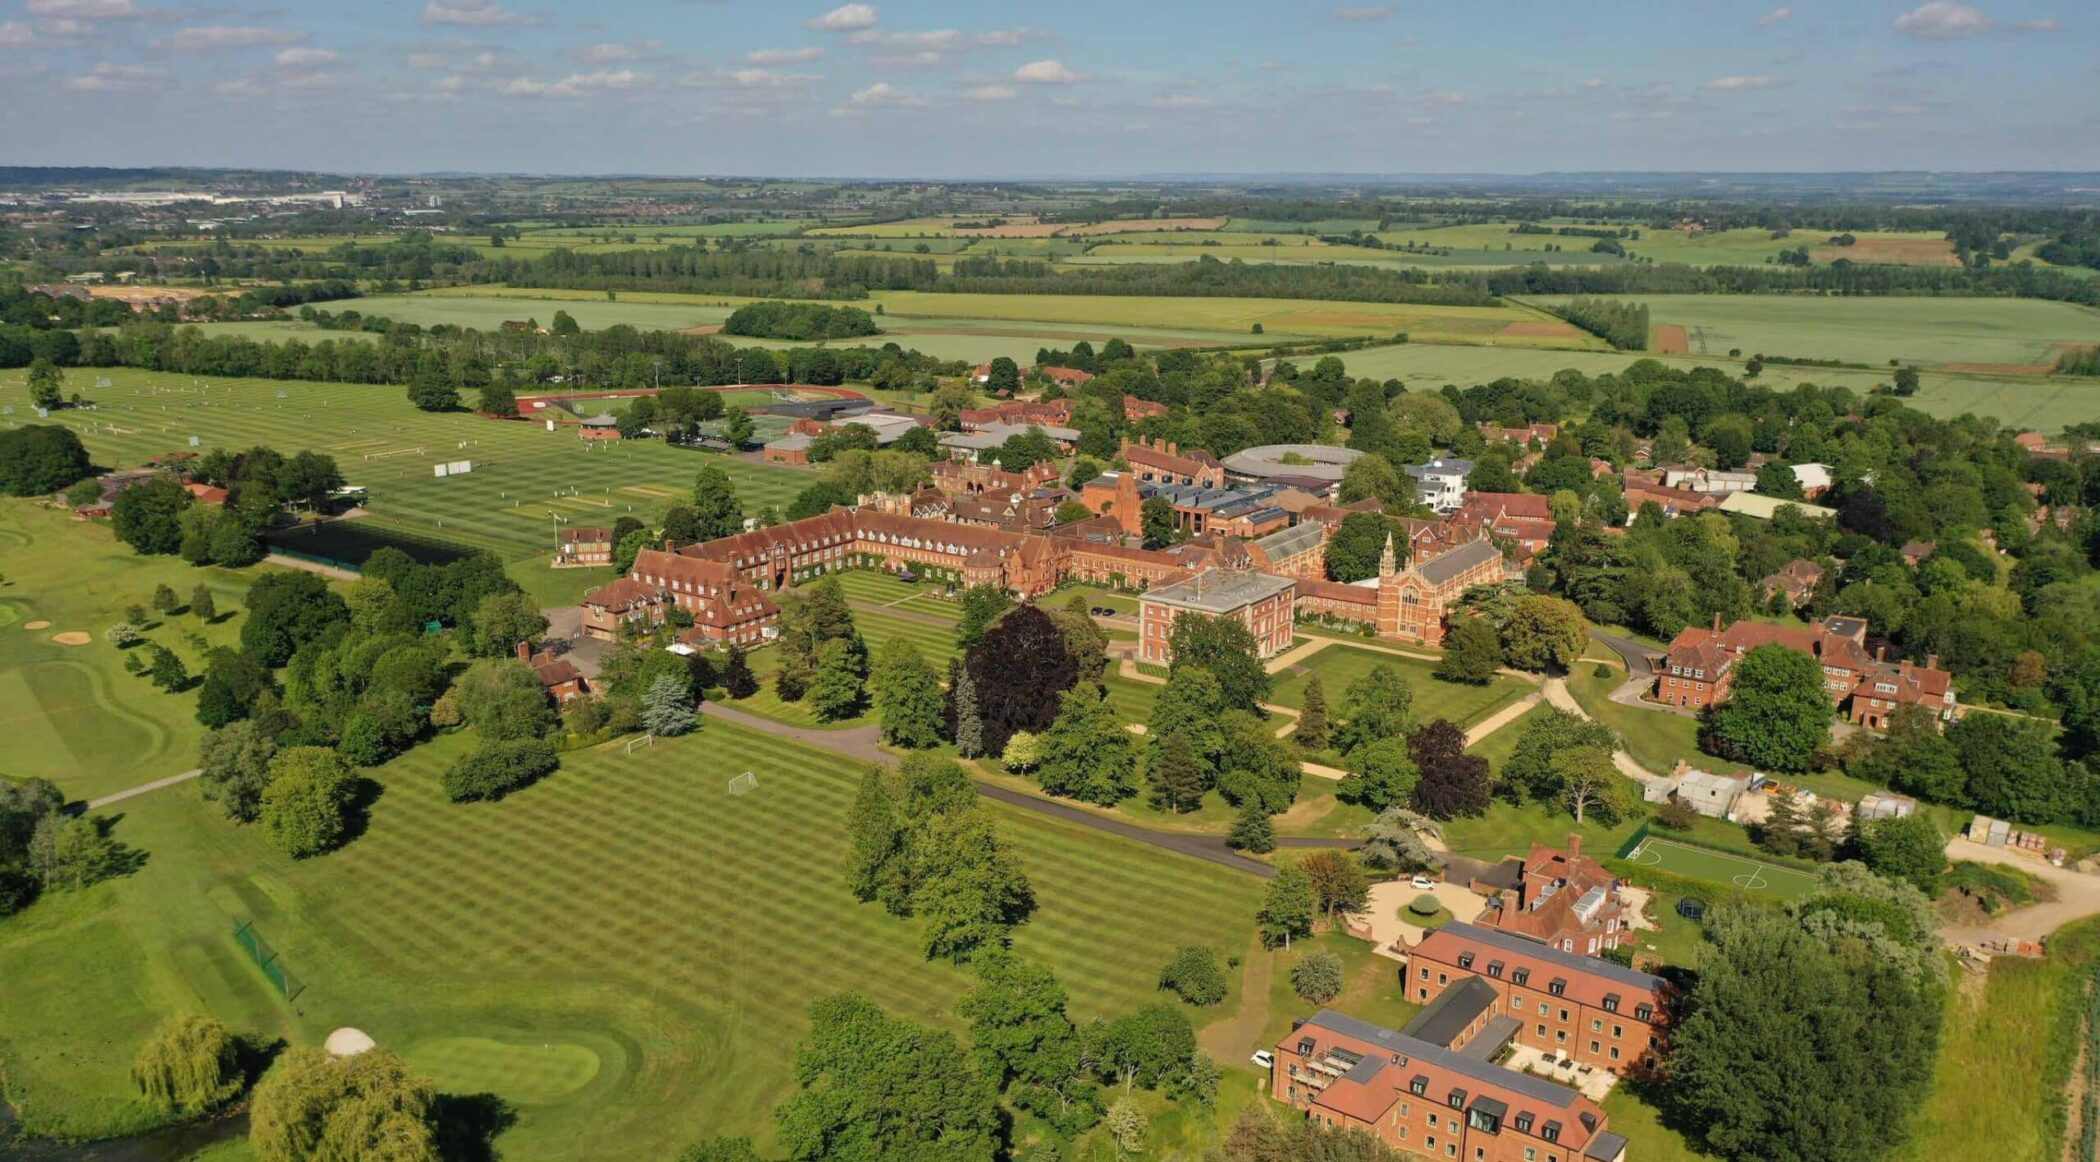 Radley College by air taken from above L Social